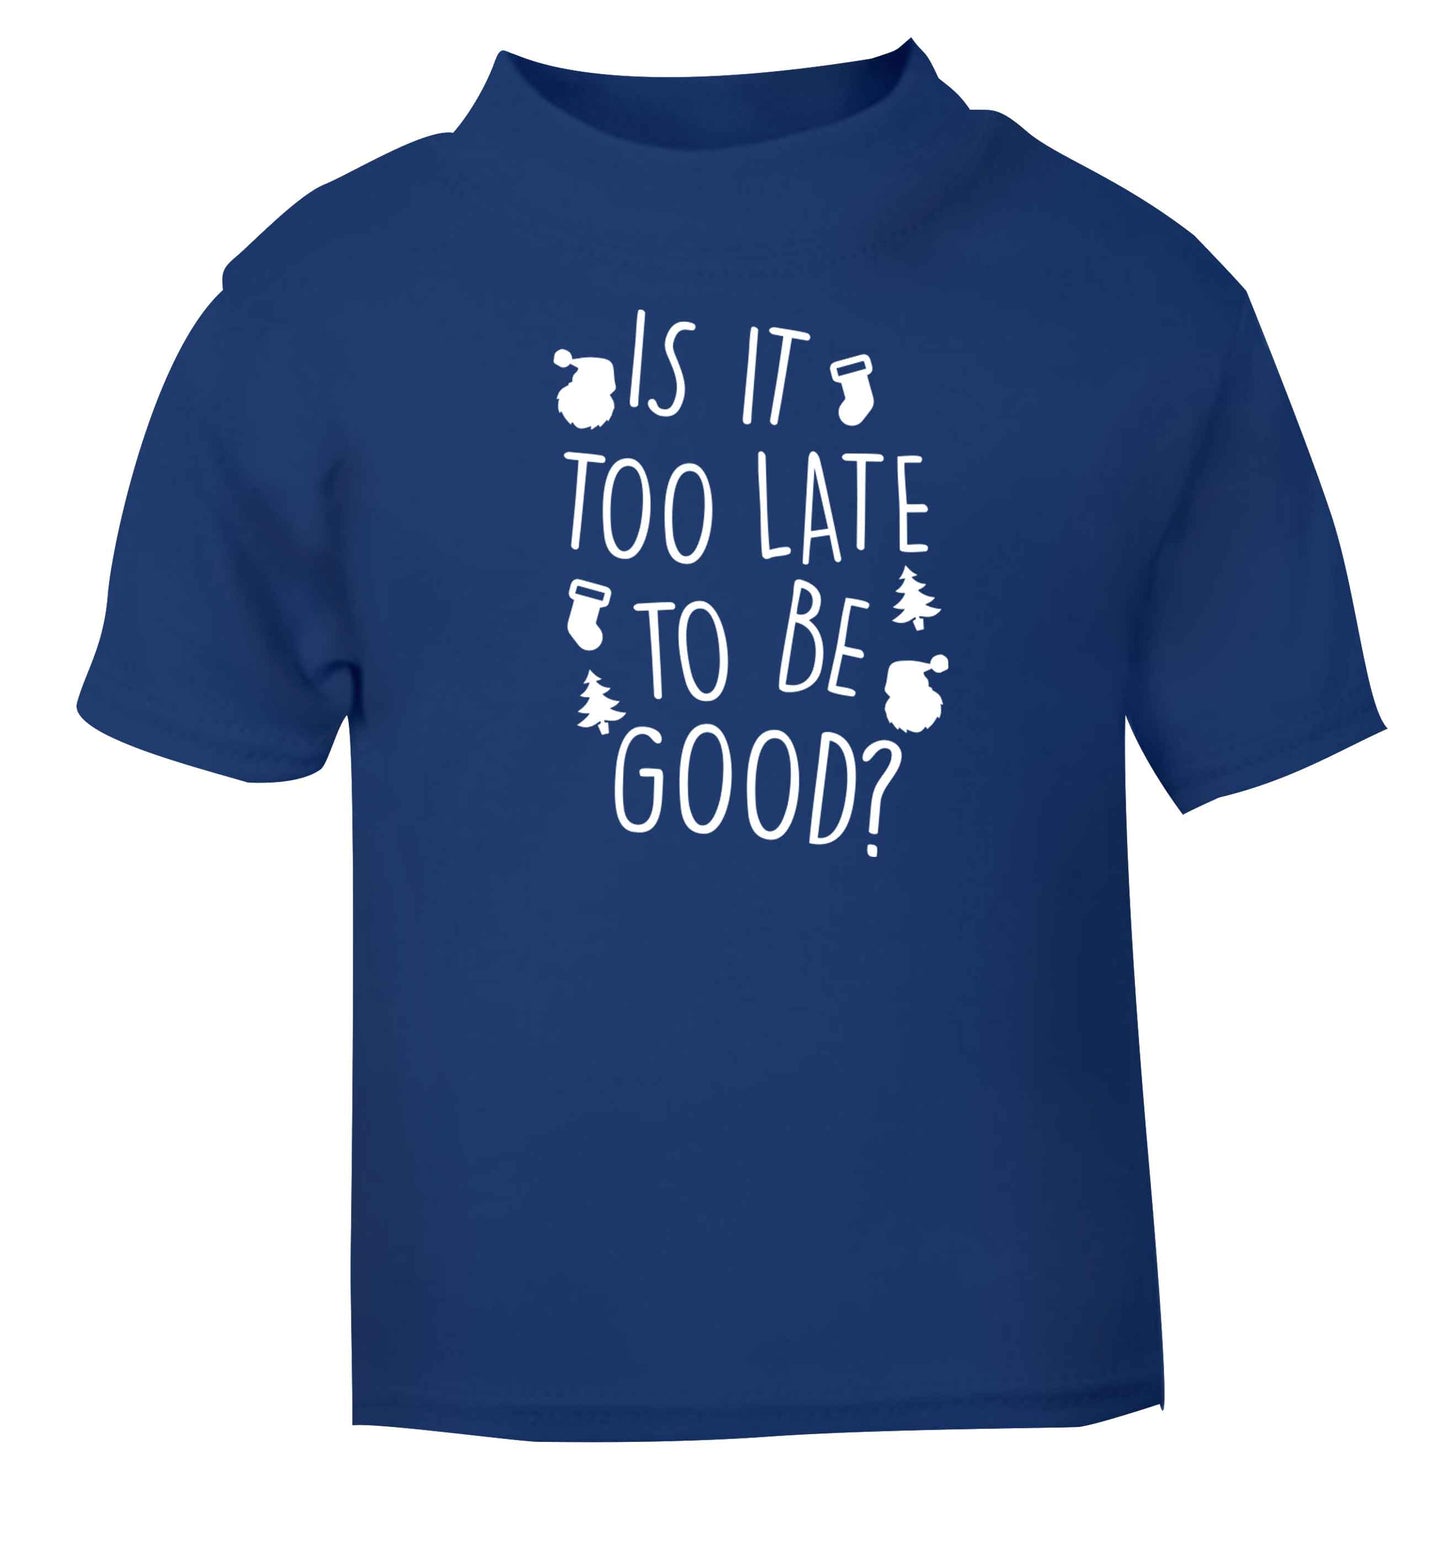 Too Late to be Good blue baby toddler Tshirt 2 Years